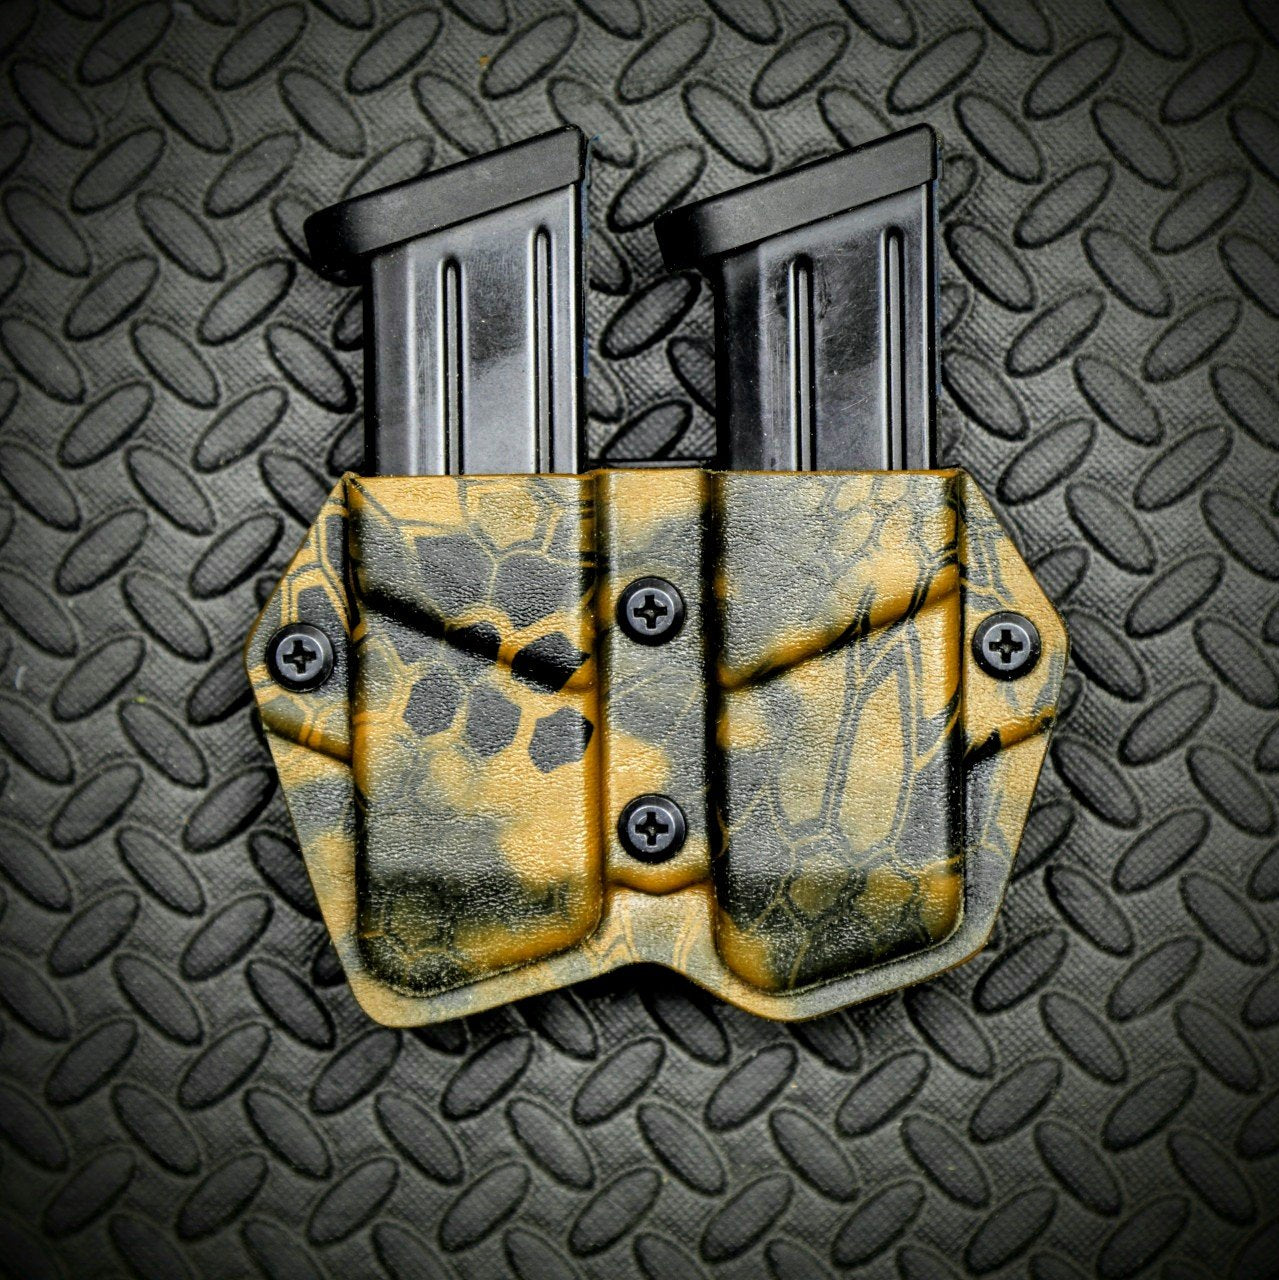 React Defender OWB Double Mag Carrier Mag Holster Mag Pouch - Coyote Kryptek (Pre-made) Kydex Holsters and Mag Pouches